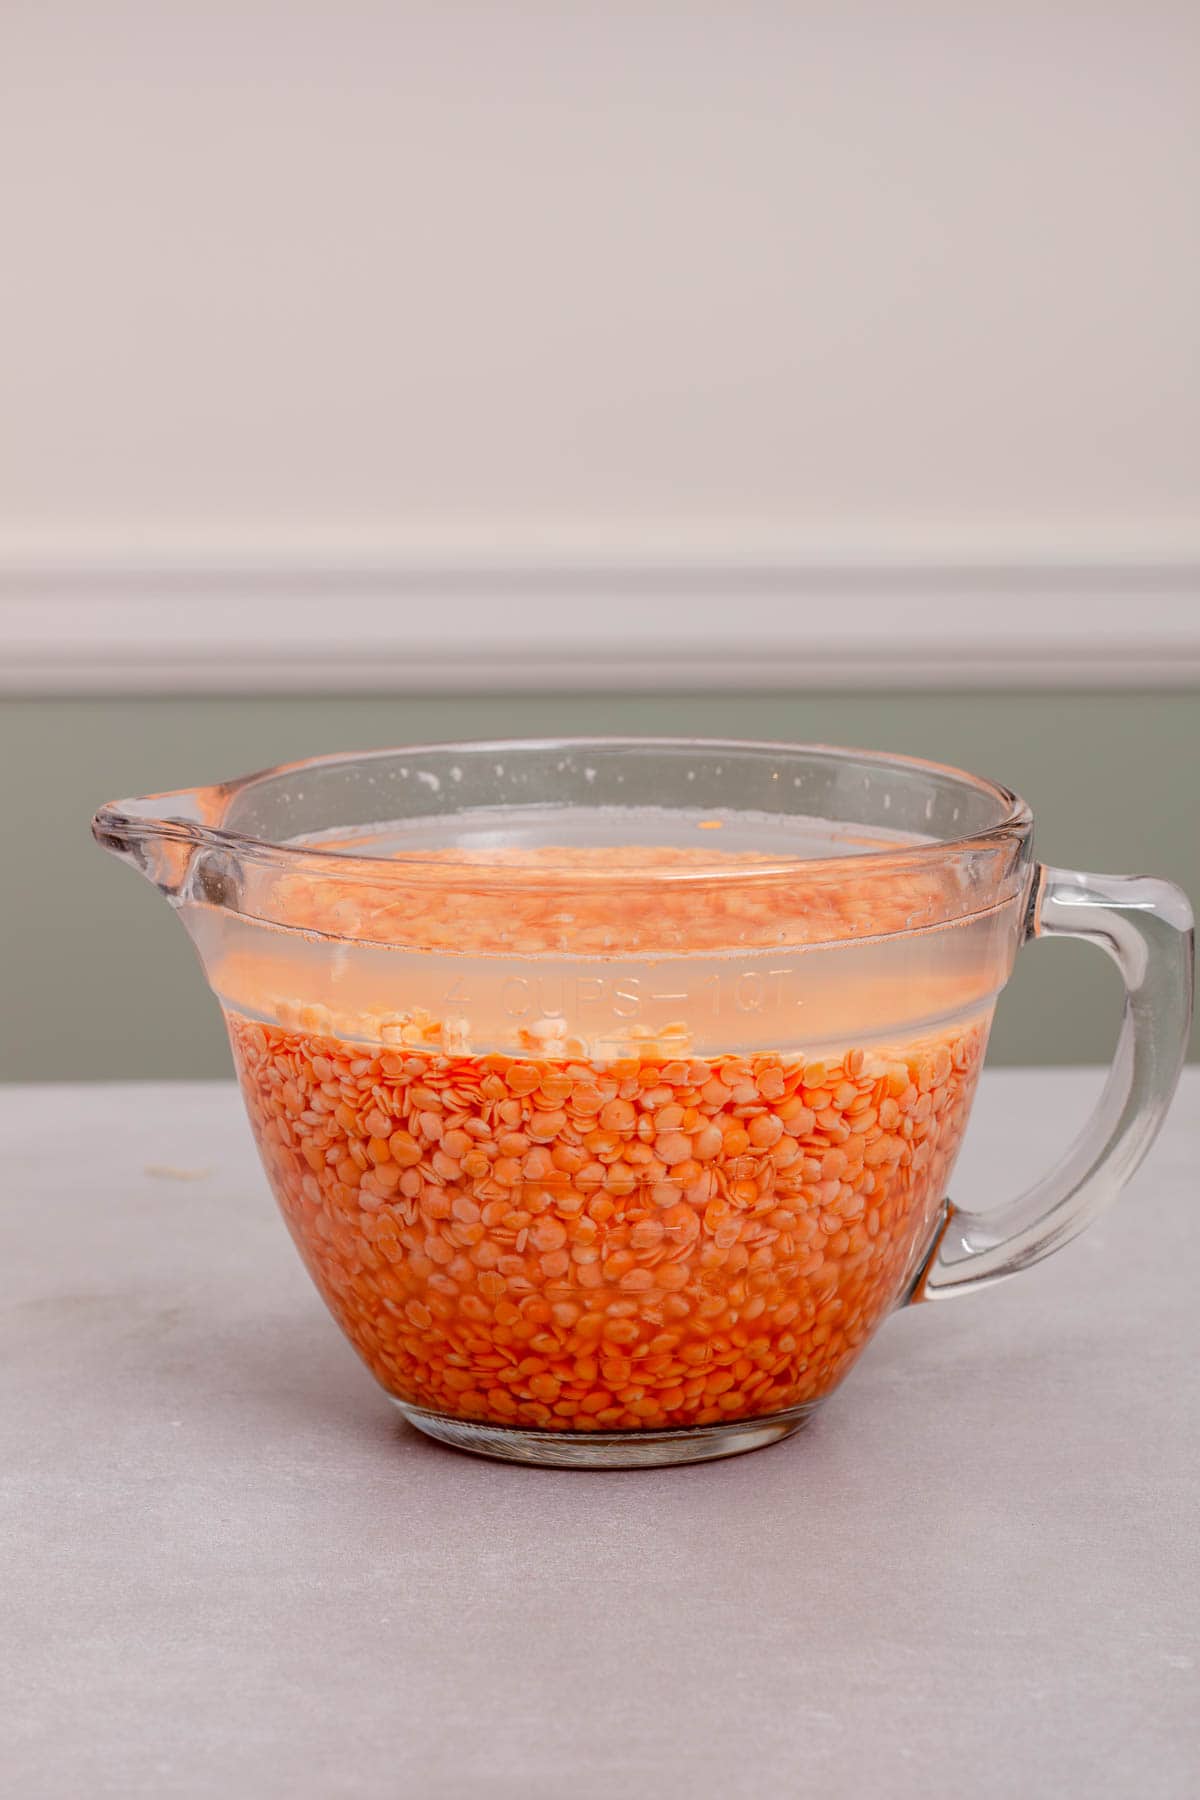 Red Lentils soaking in a large measuring cup of water.